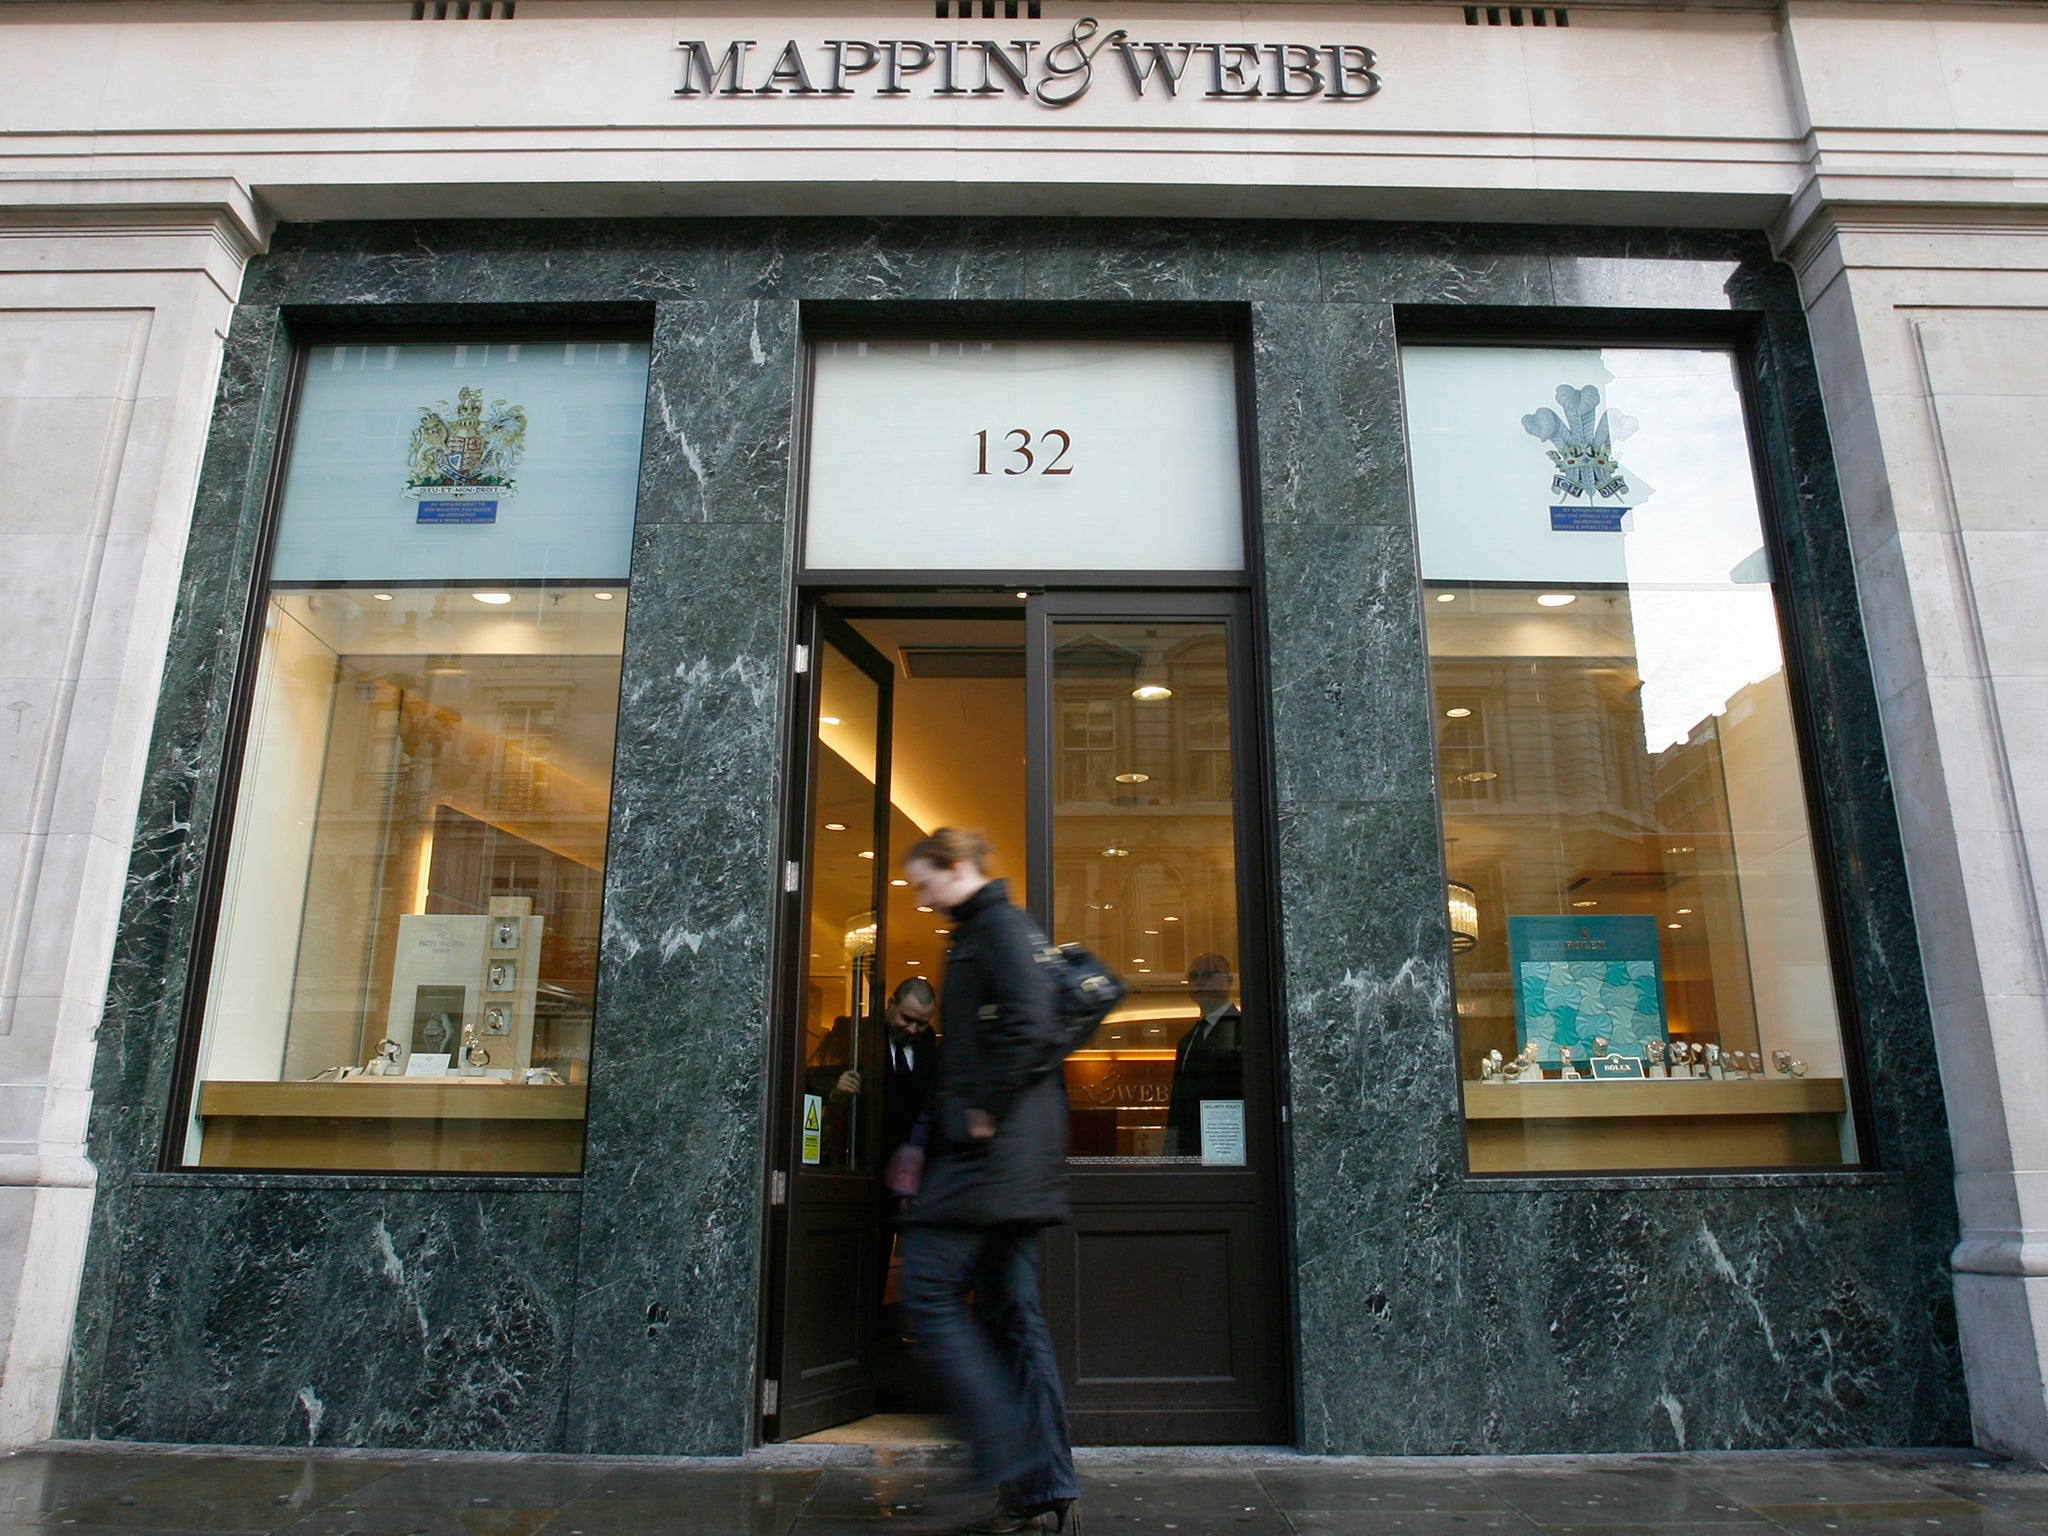 The jeweller Mappin & Webb, one of the firms accused of using tax havens, has held a royal warrant since 1897